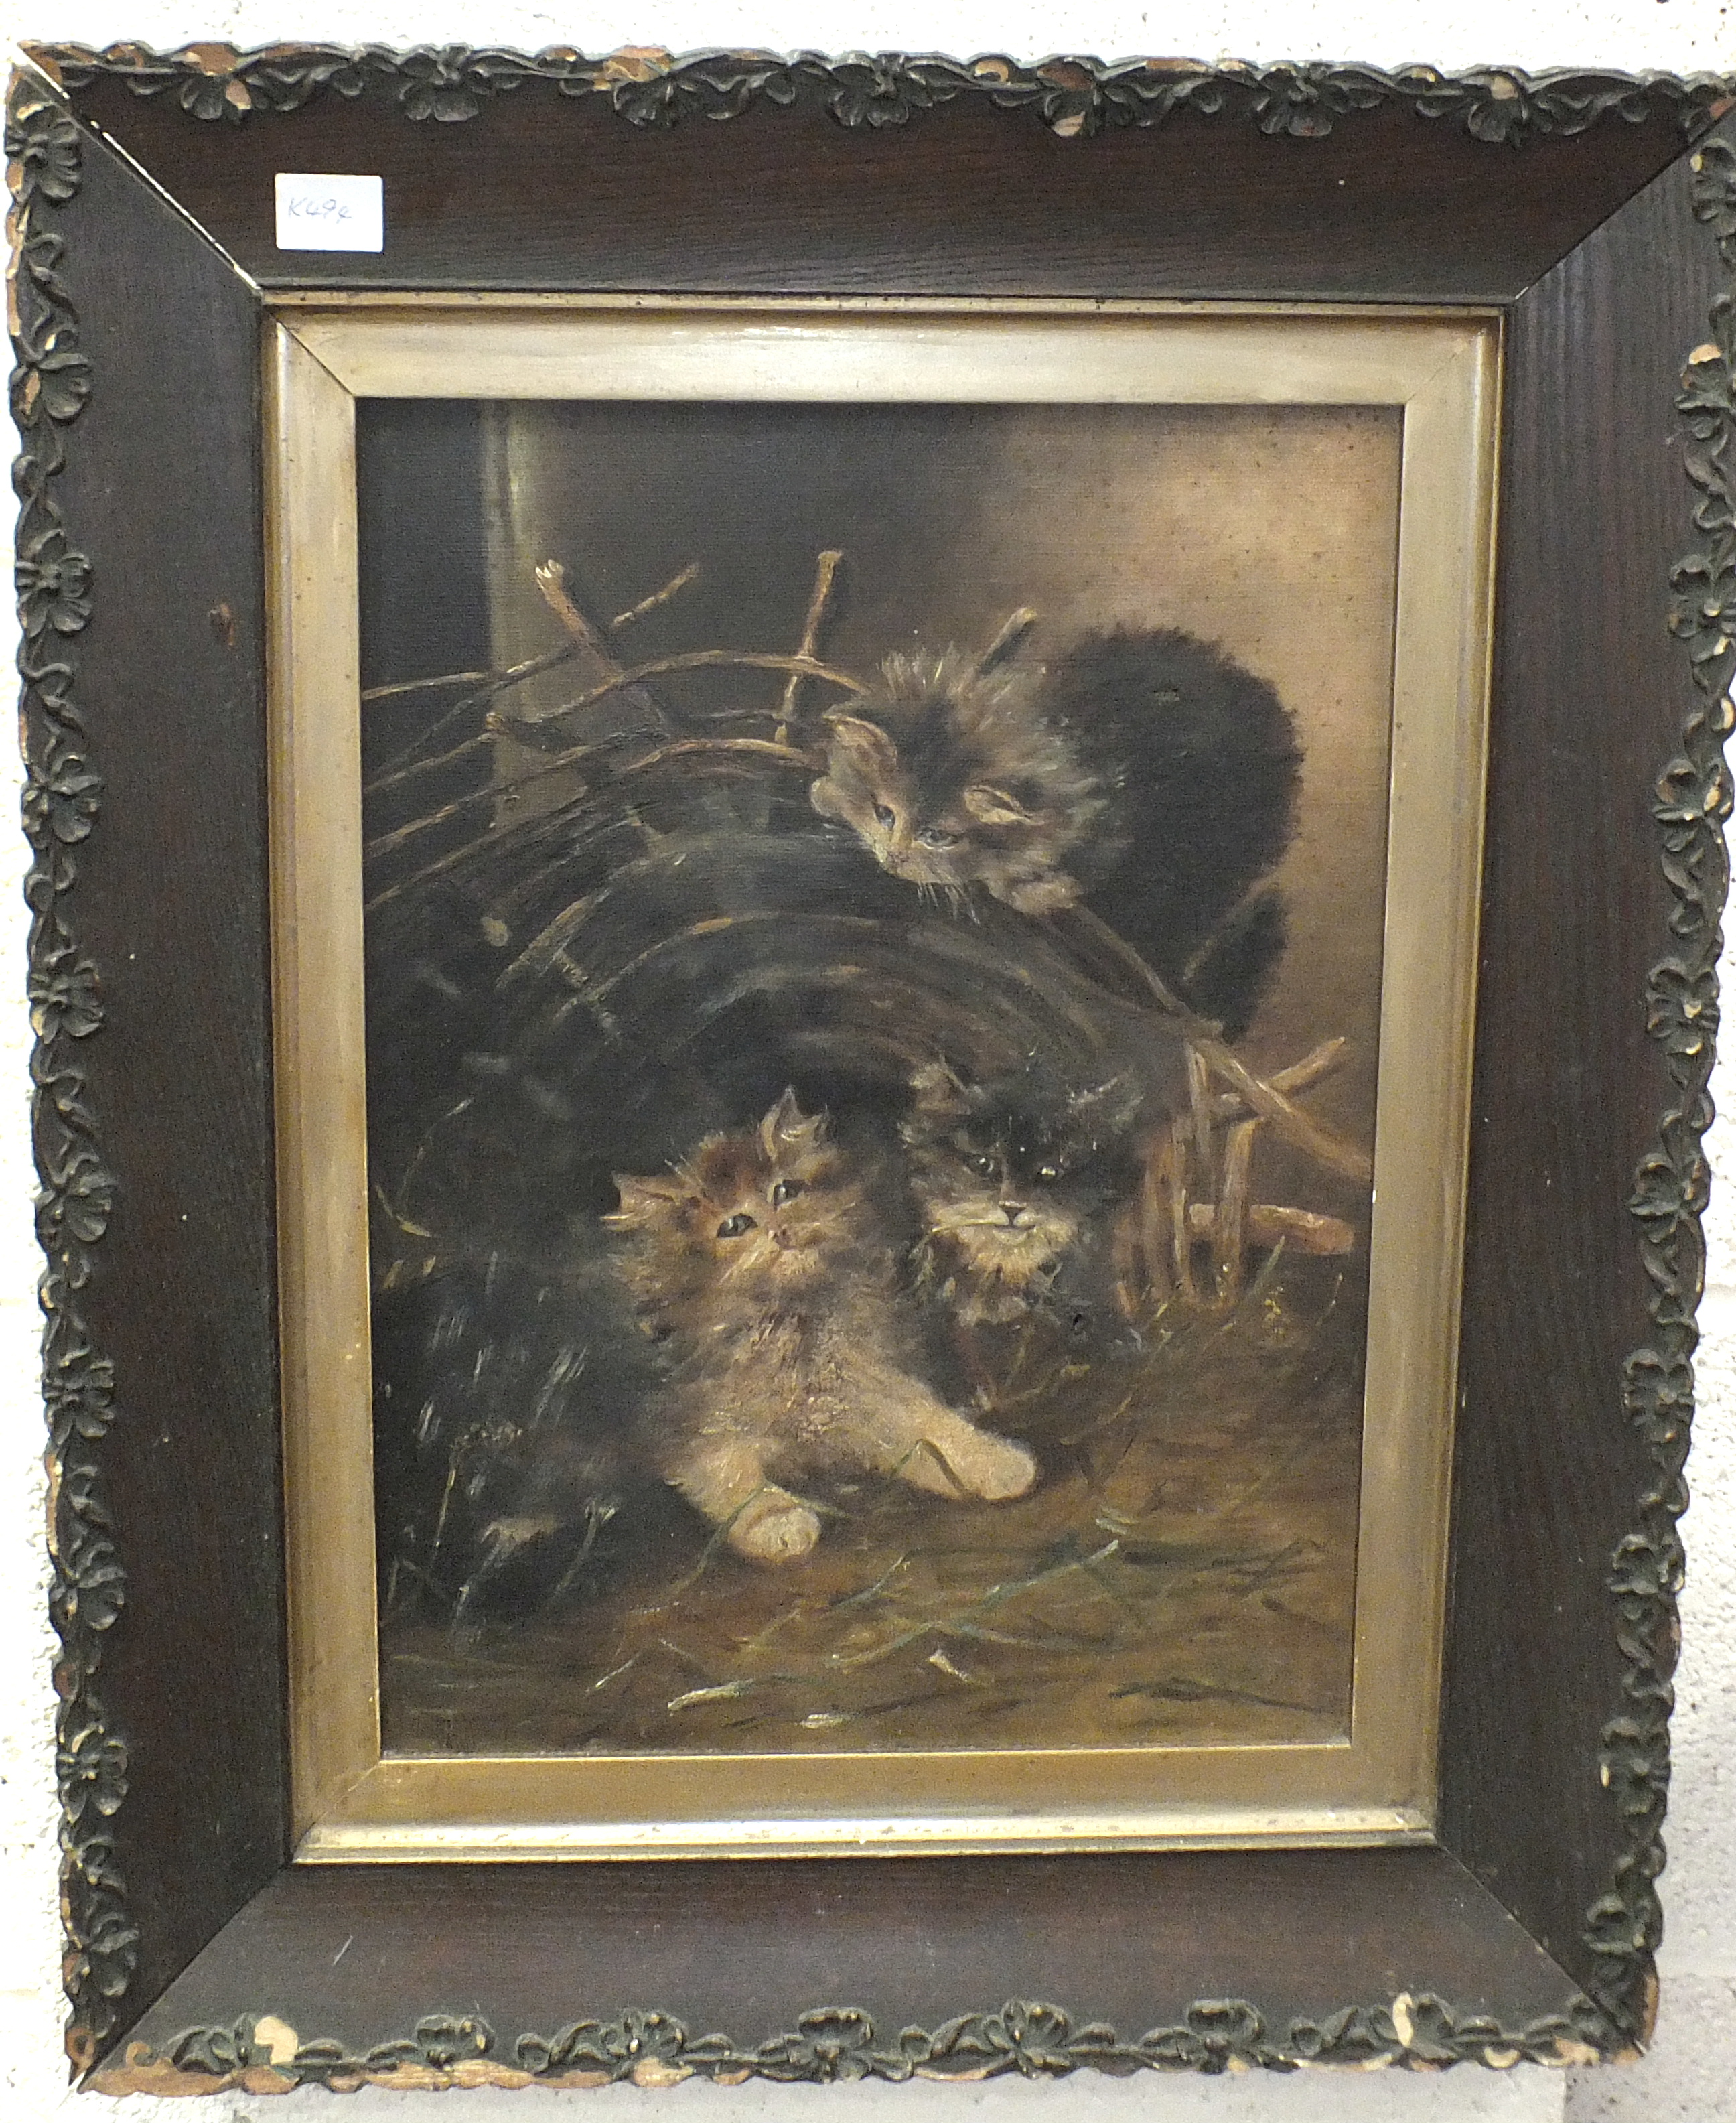 Late-19th/early-20th century, 'Kittens playing in a wicker basket', unsigned oil on canvas, 38 x